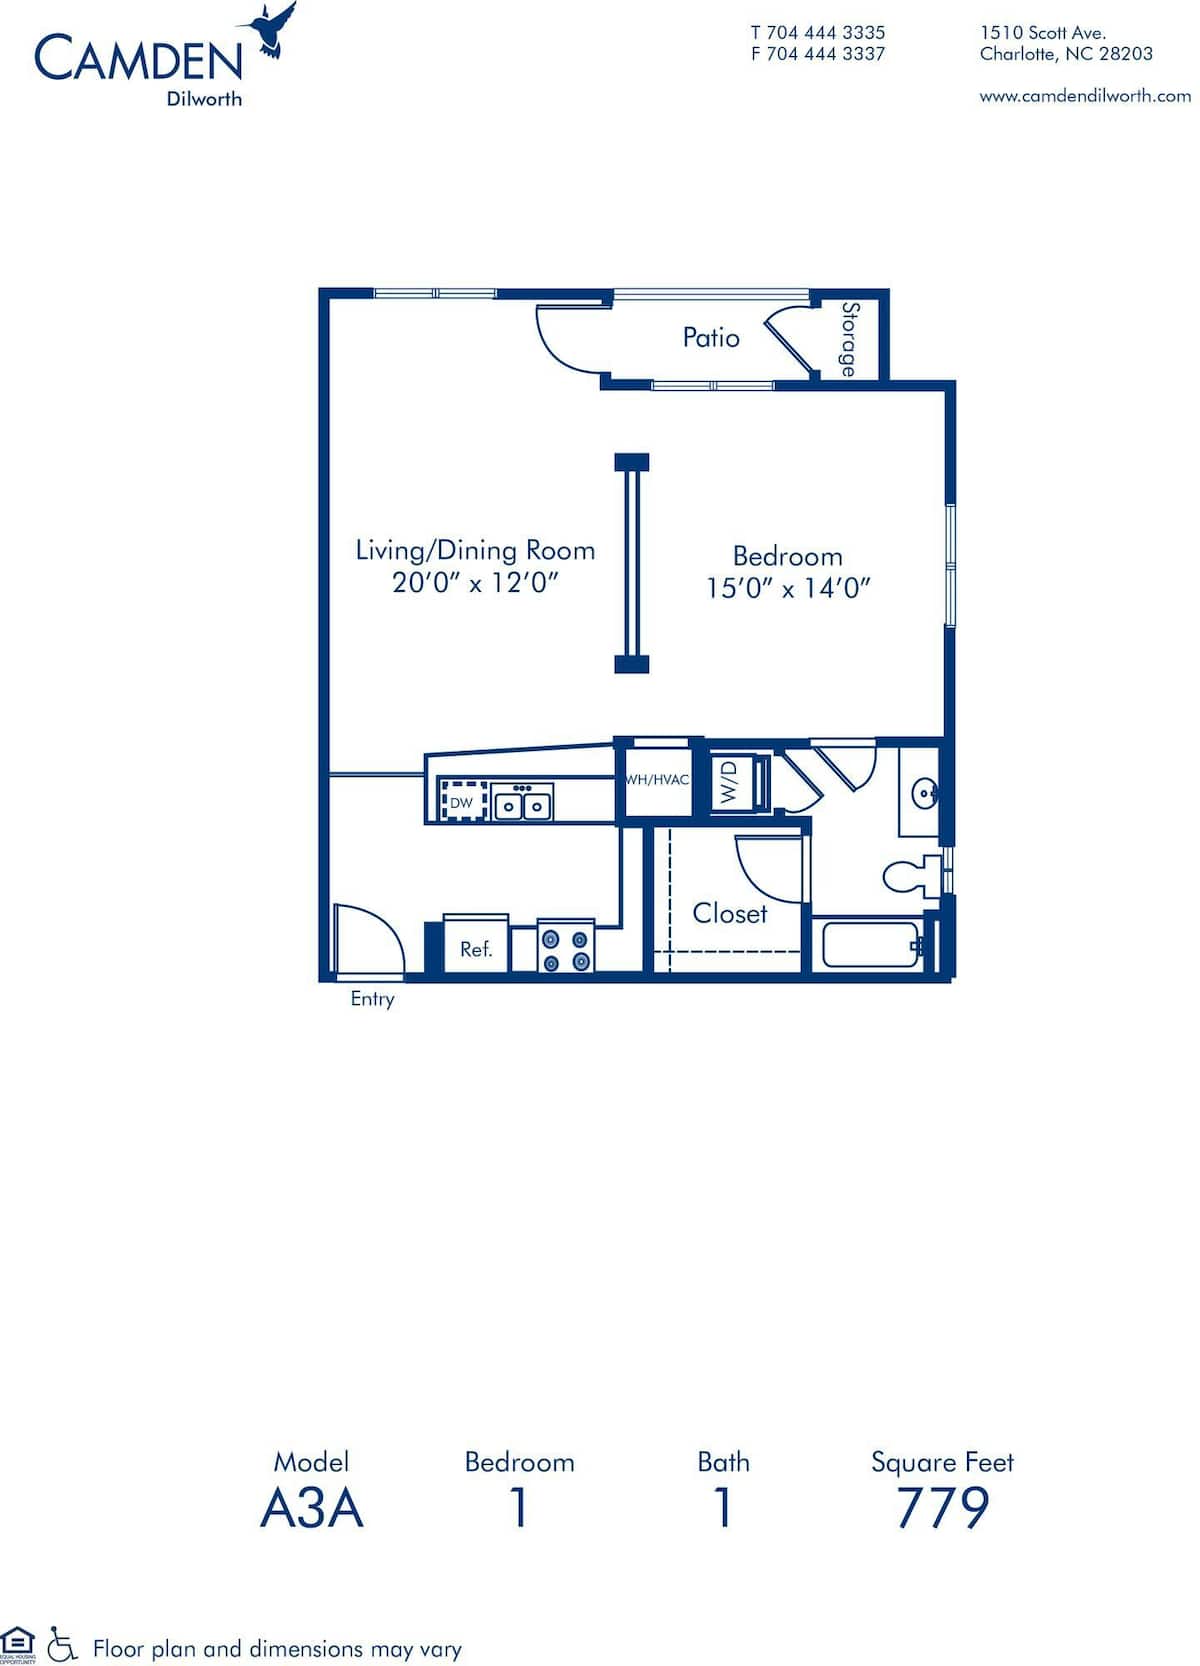 Floorplan diagram for A3A, showing 1 bedroom